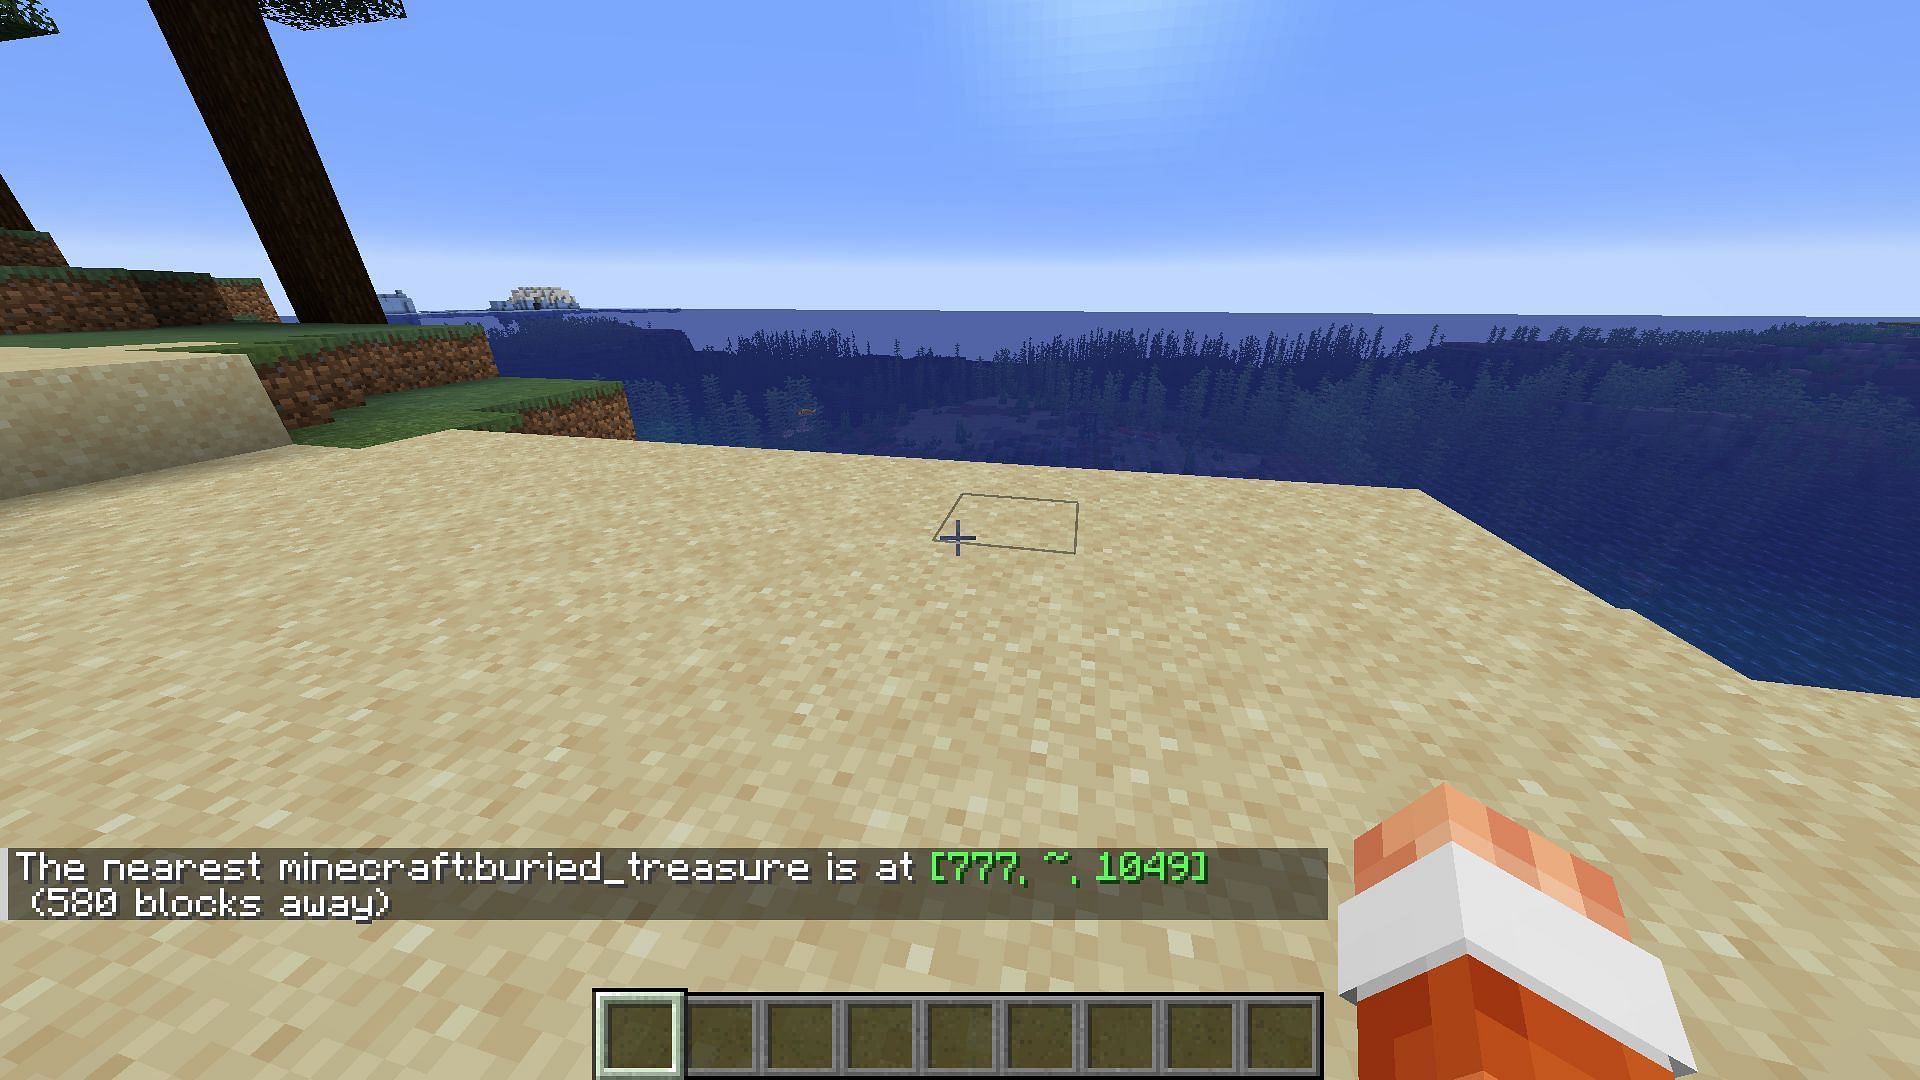 If you have cheats enabled in Minecraft, you can teleport to the nearest buried treasure and dig it up (Image via Mojang)